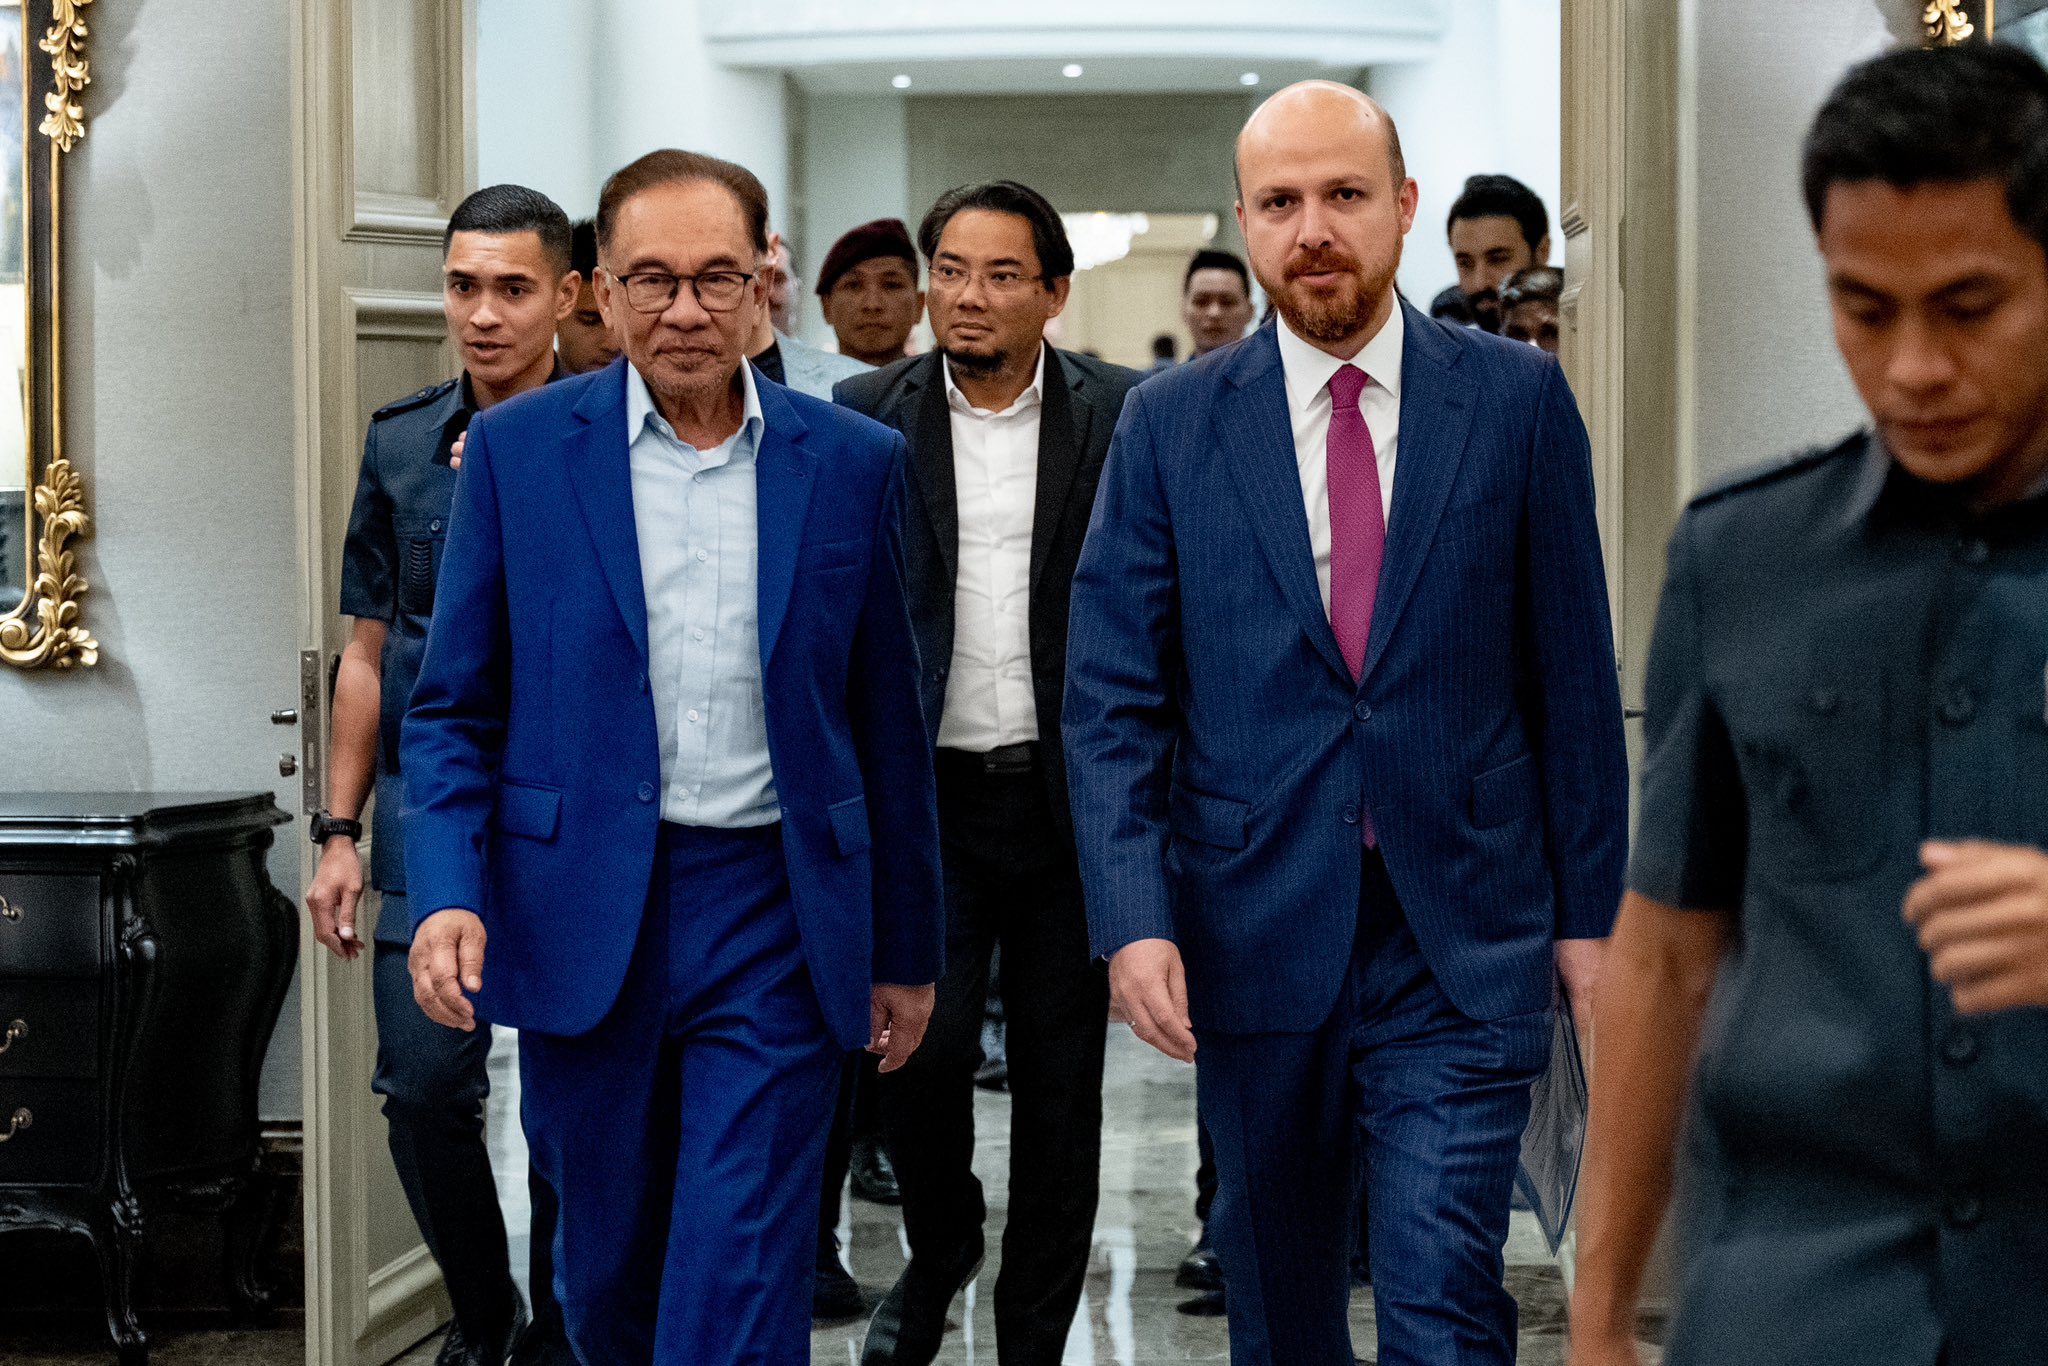 Ever wondered why anwar doesn't wear a tie? Here's the reason